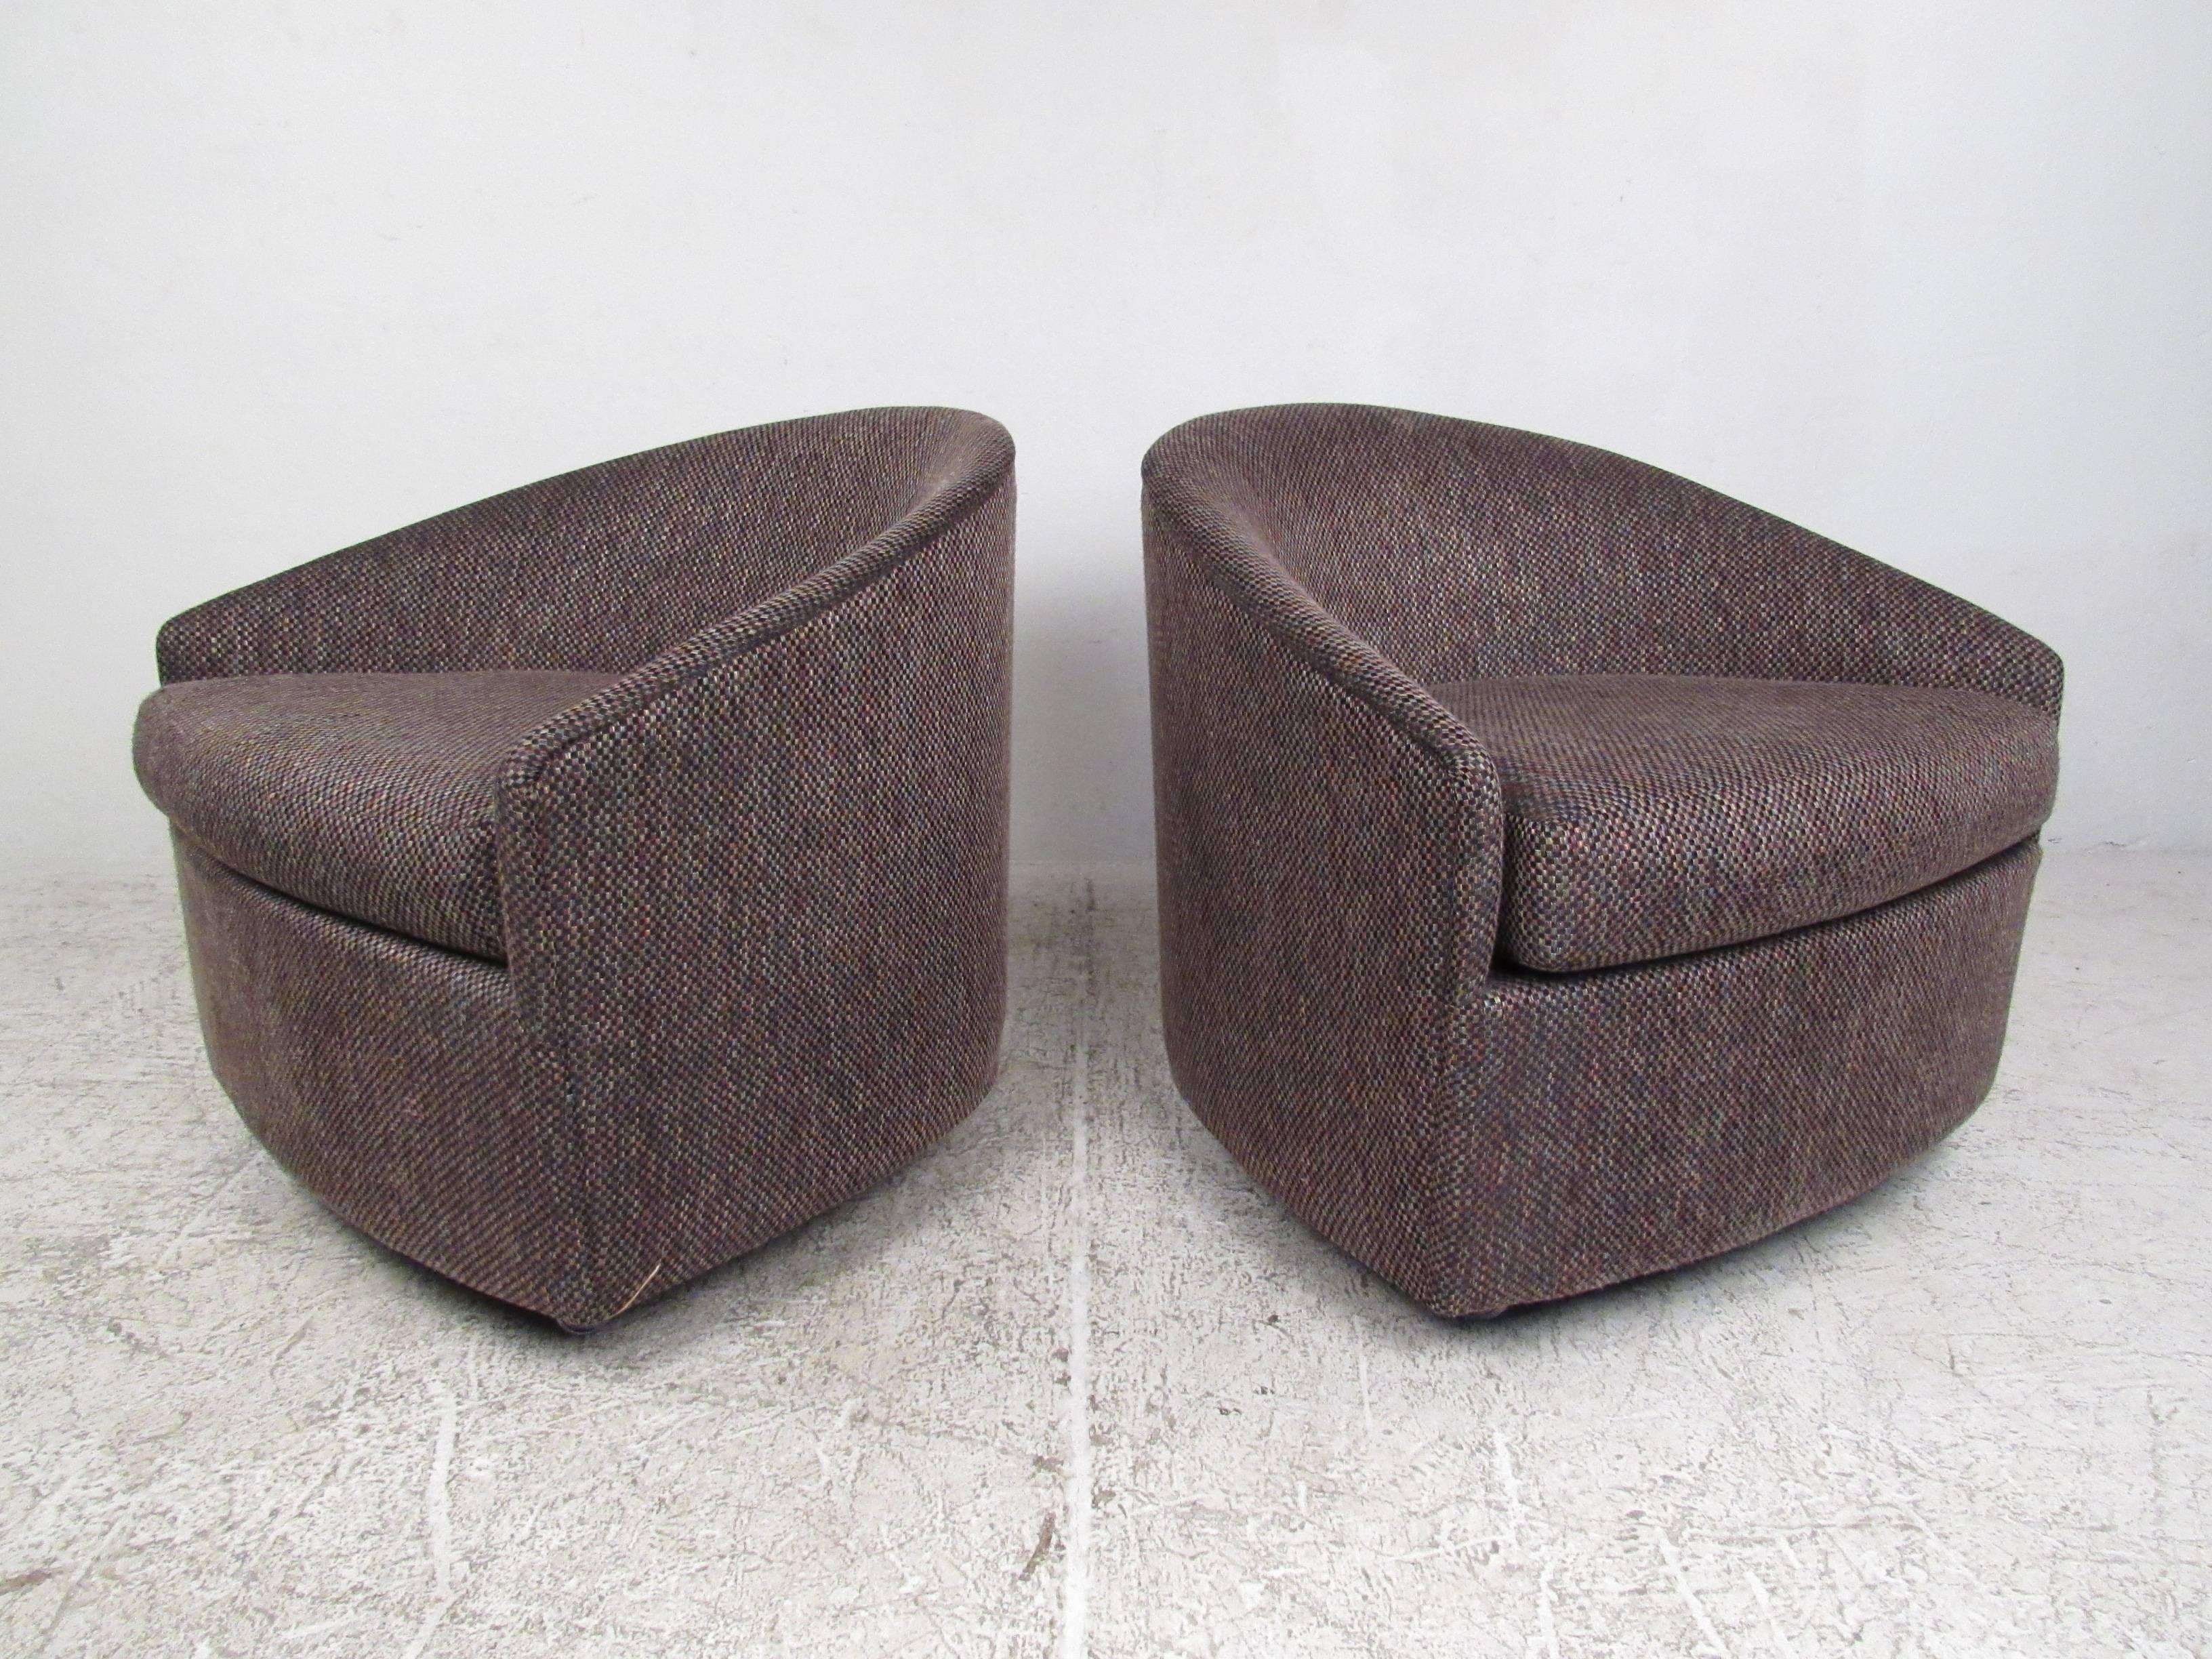 This unique pair of vintage lounge chairs features sculpted crescent shaped backs, stylish vintage fabric and comfortable design. Rolling casters make these an excellent option for occasional seating in any modern interior. Please confirm item